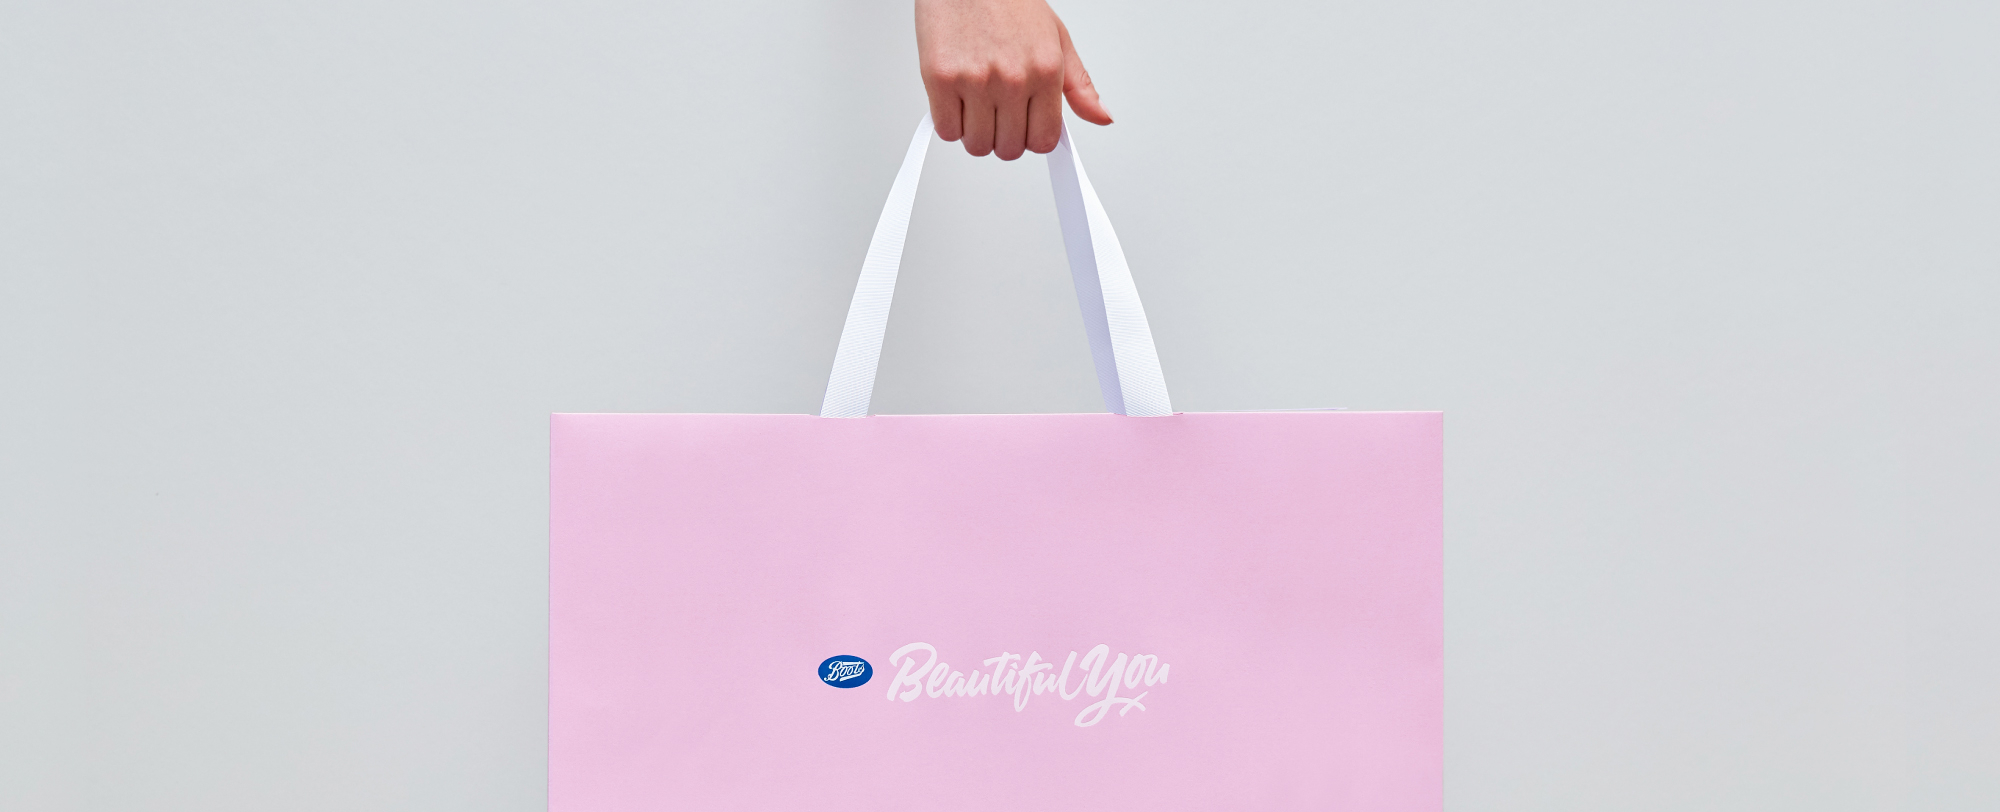 Boots Beautiful You Banner